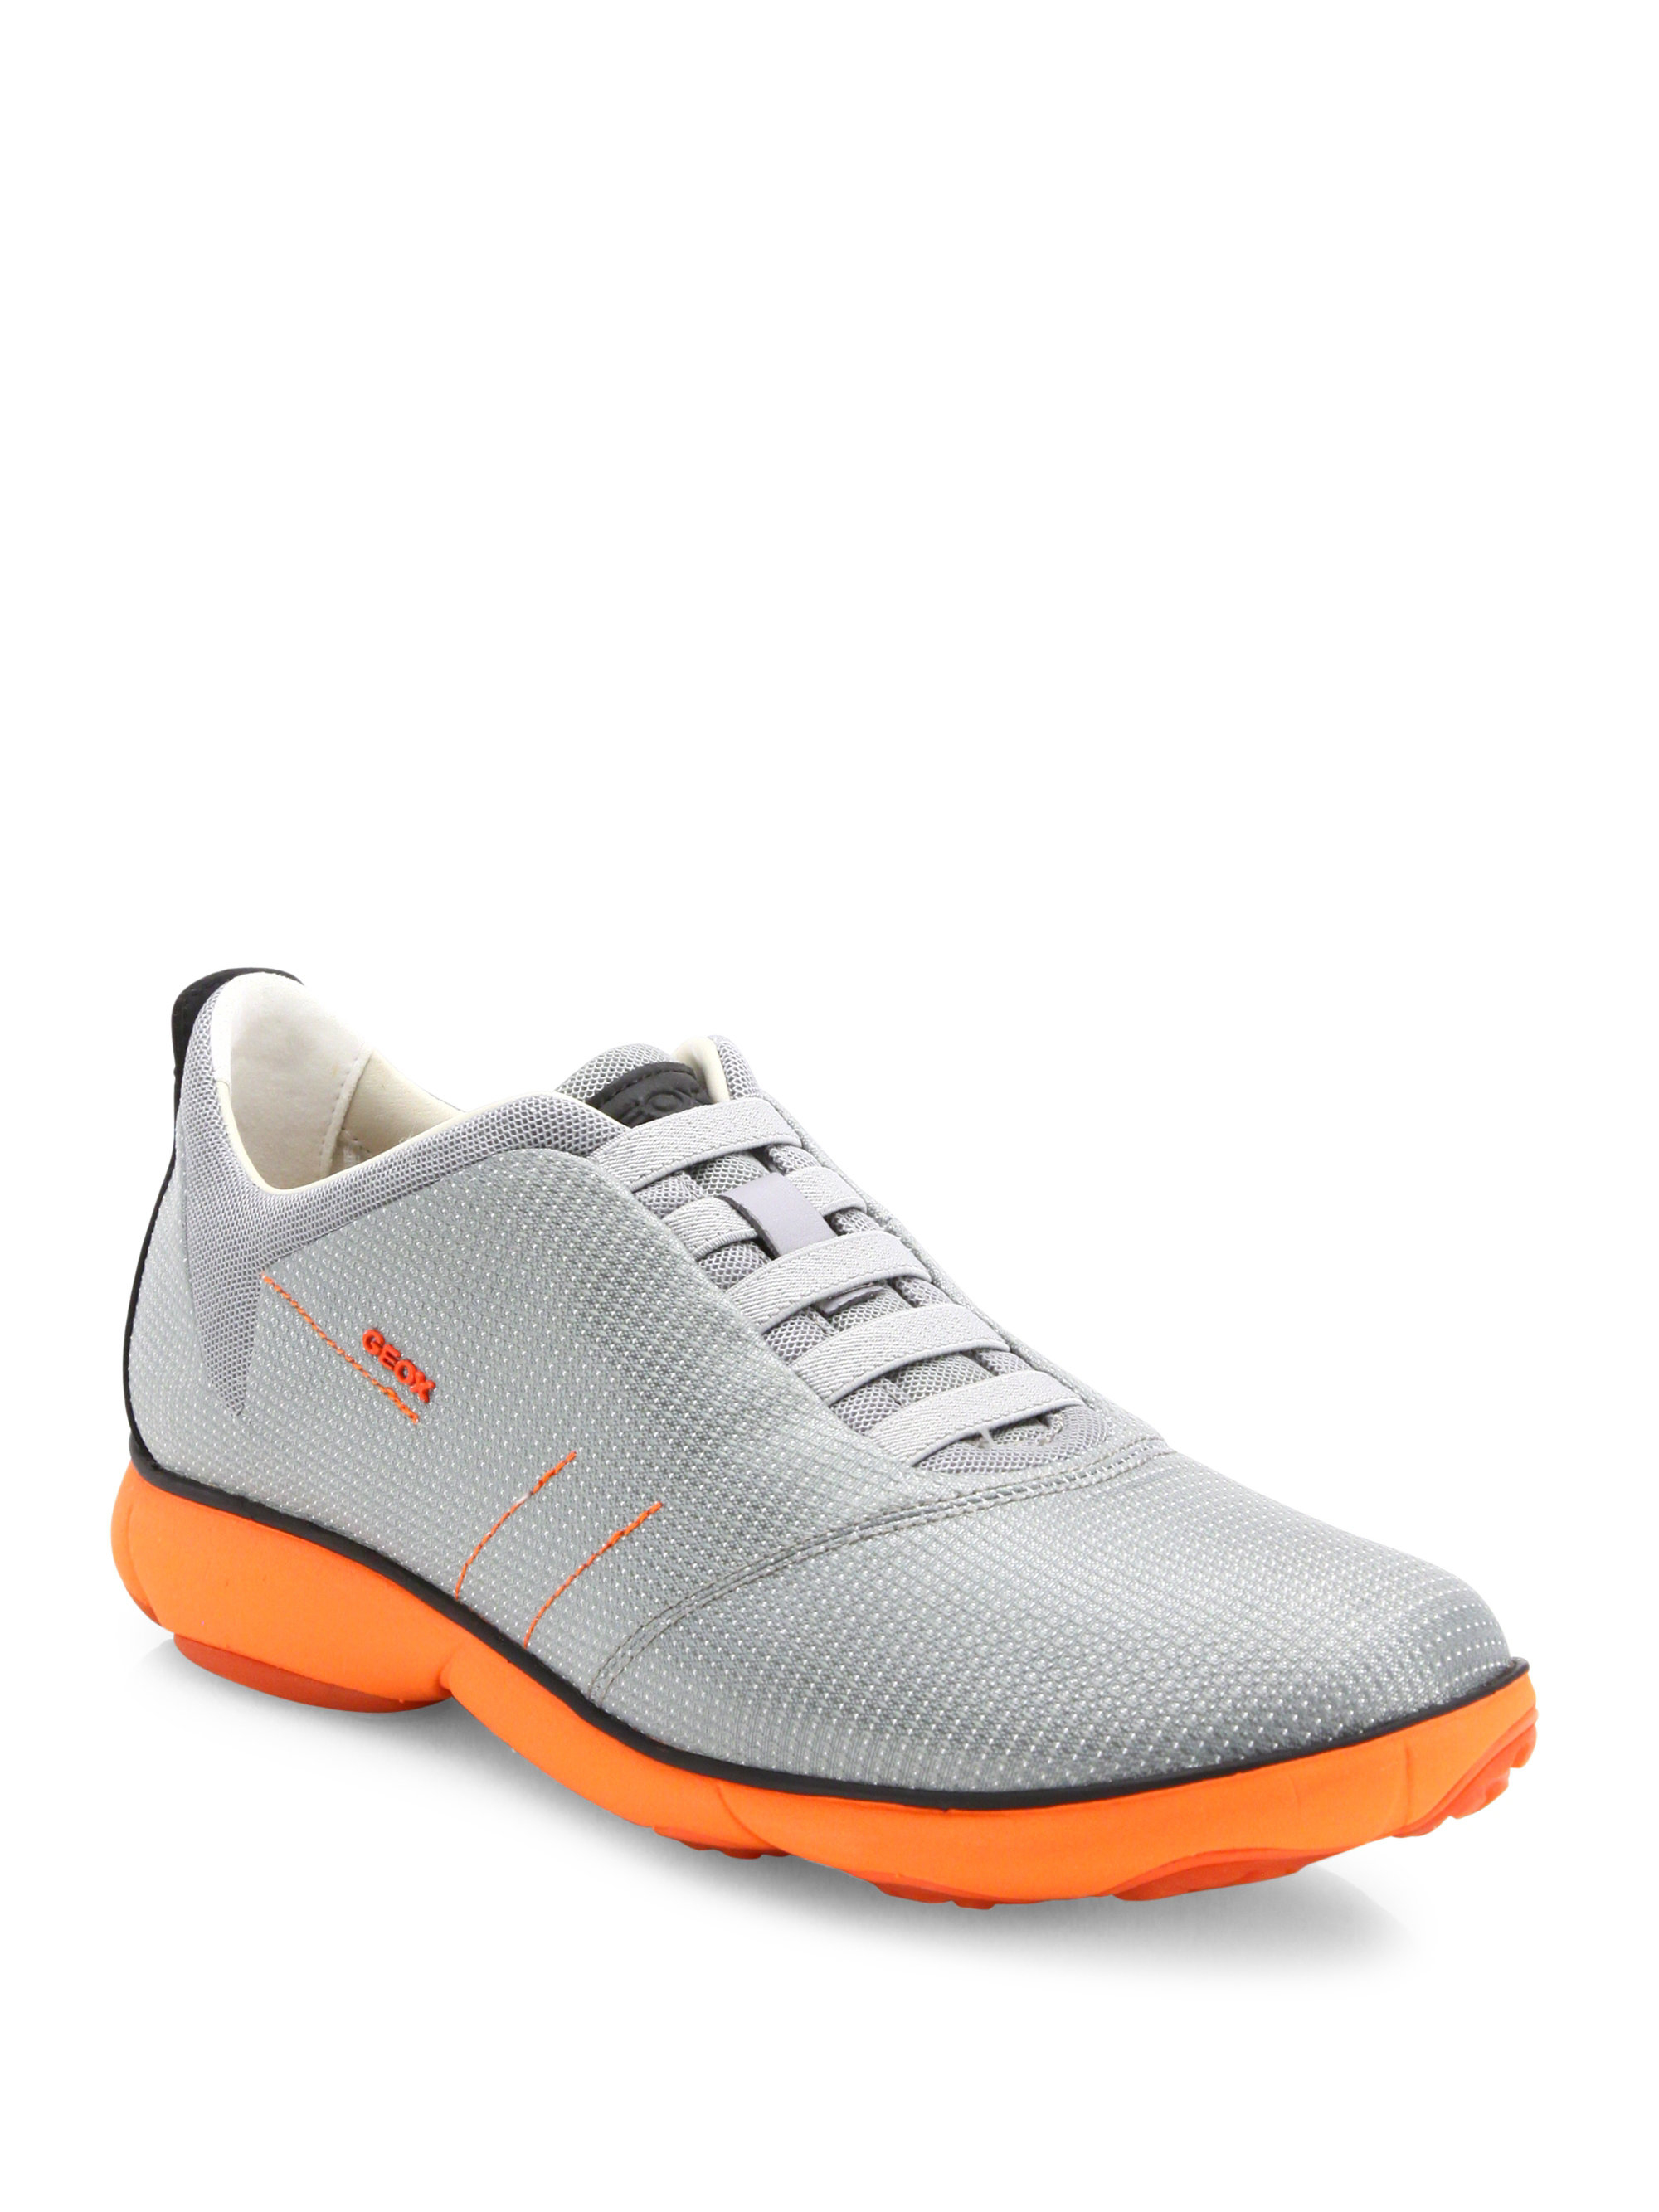 Geox Synthetic Nebula Mesh Reflecting Sneakers in Silver-Orange (Gray) for  Men - Lyst